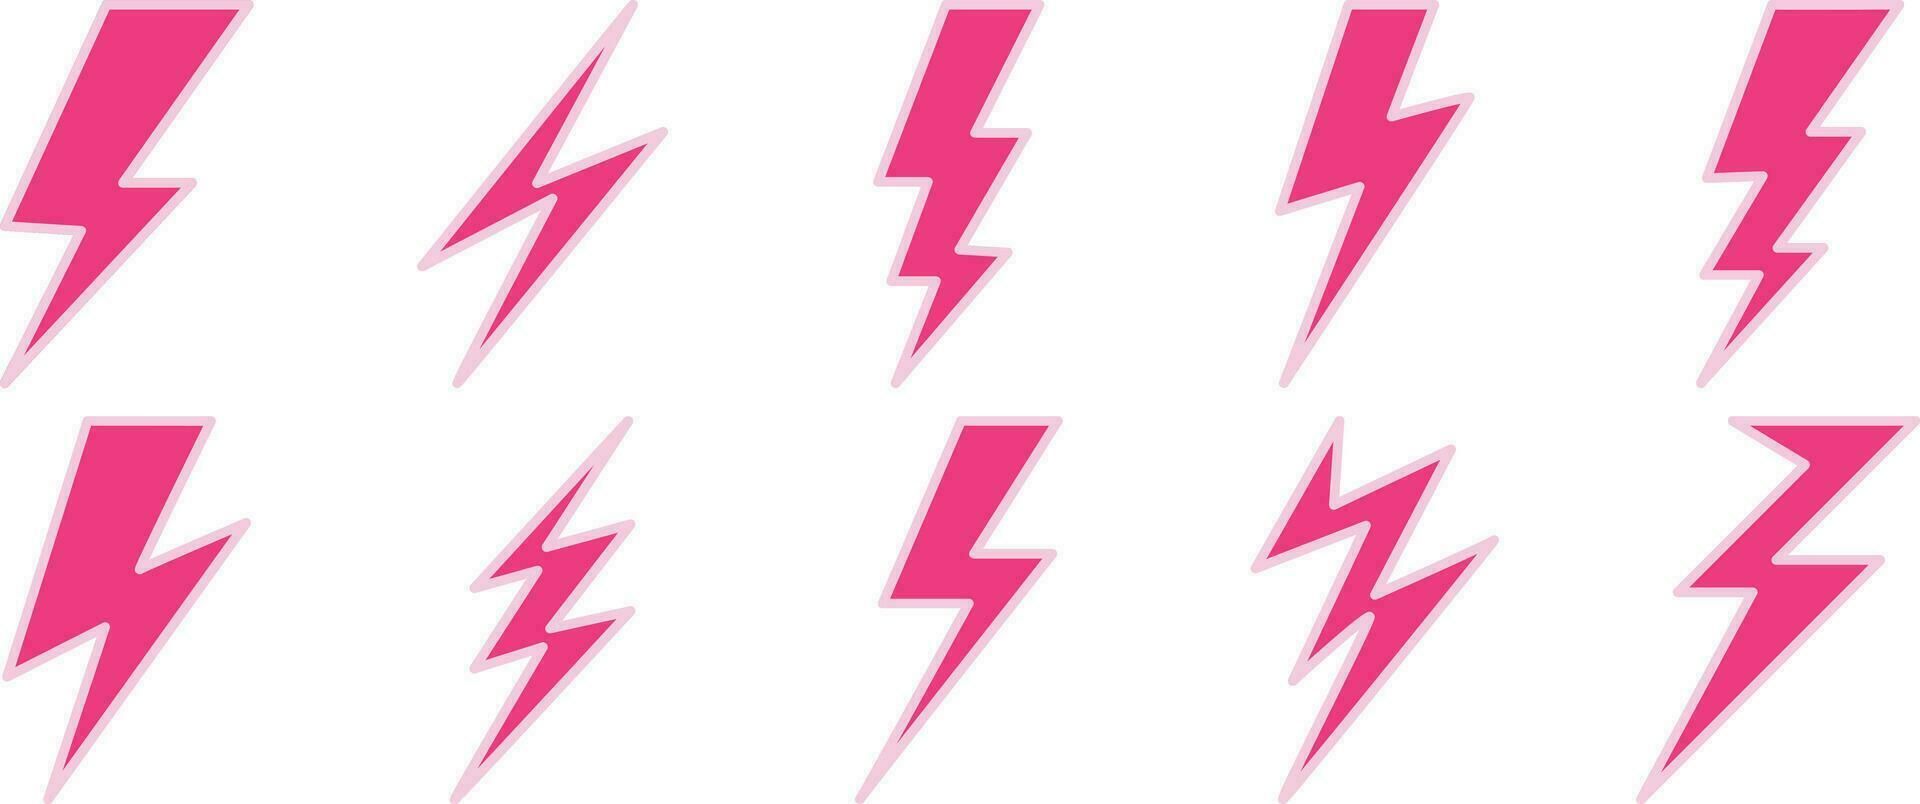 Set of lightning bolt, electricity, and storm icons in pink on a white background. Vector illustration.